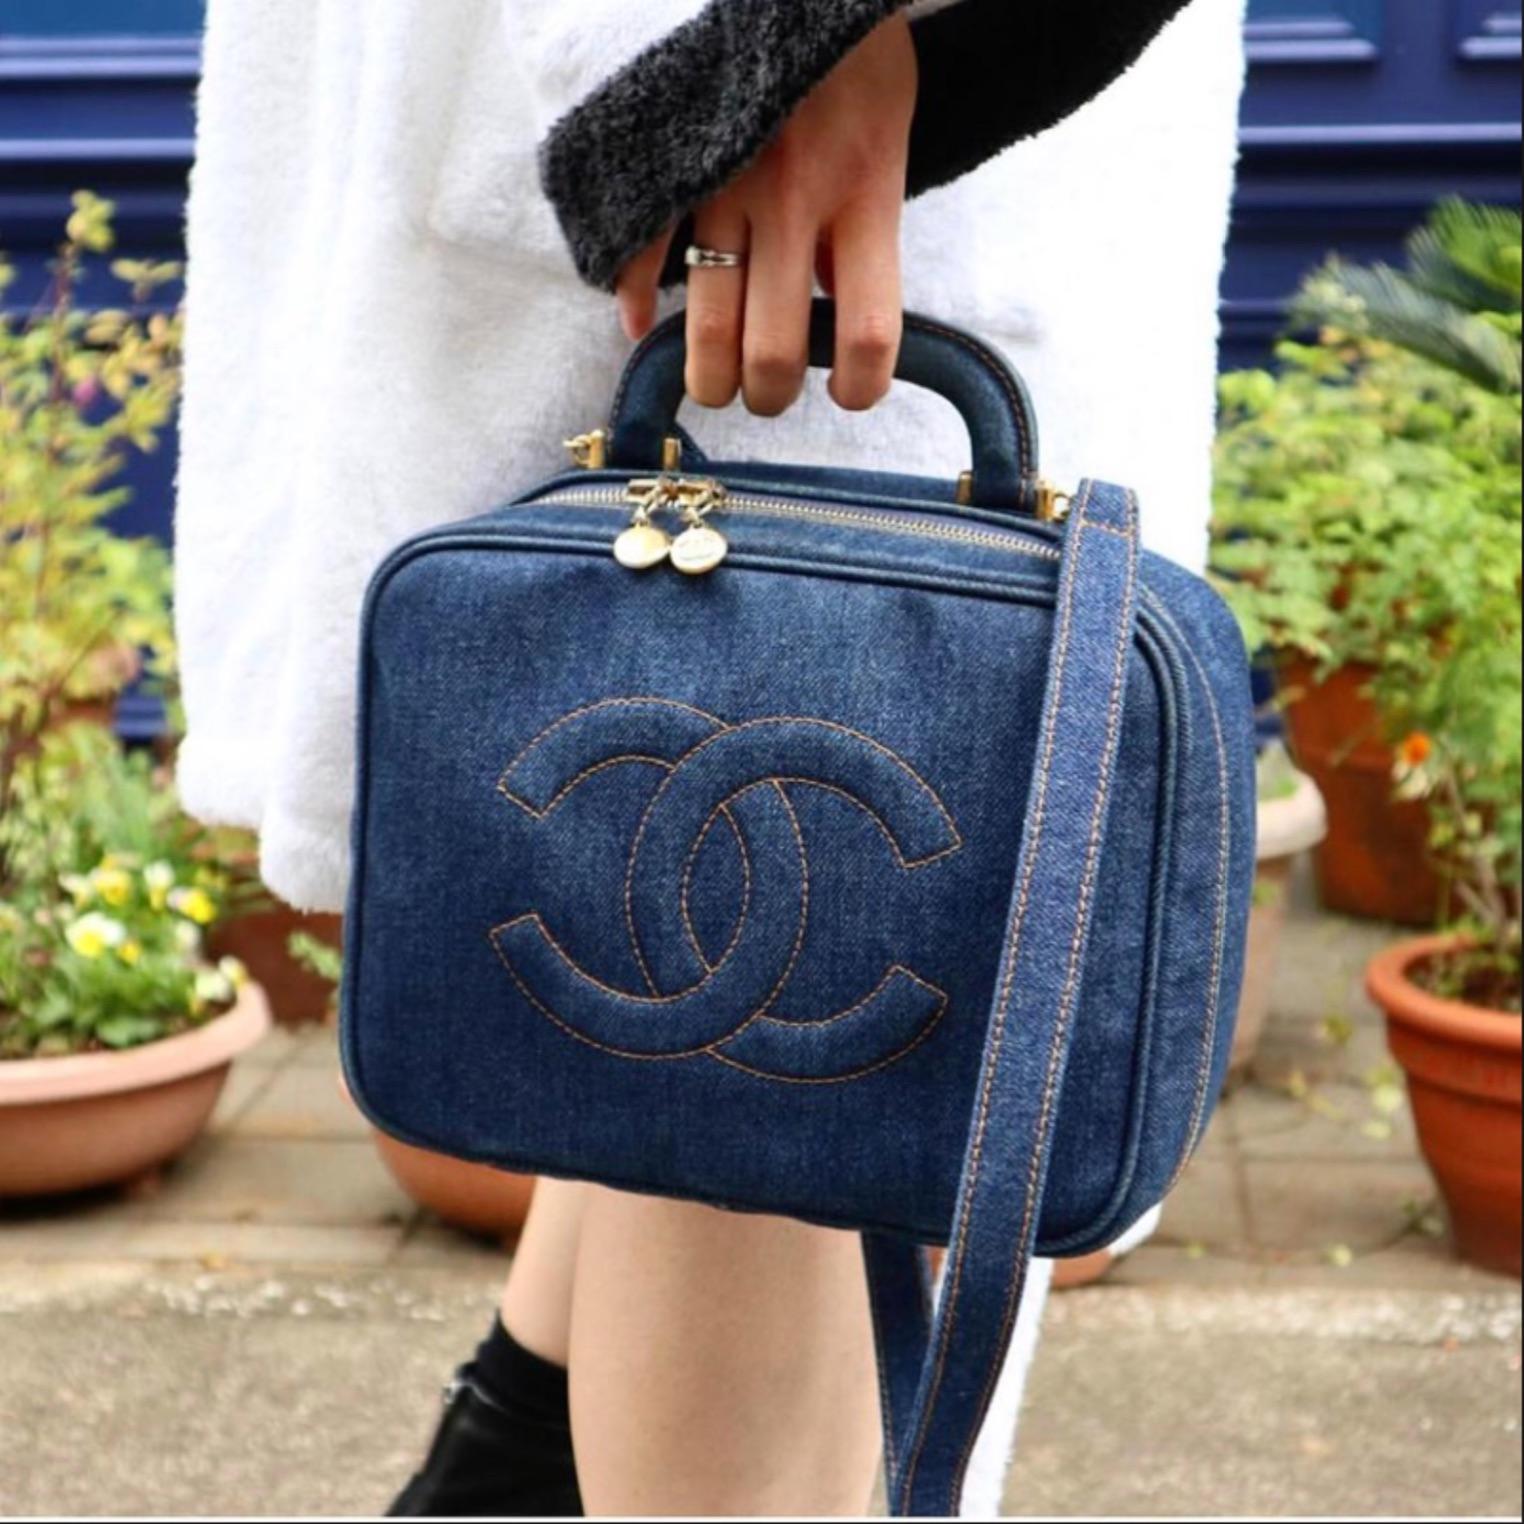 Chanel Rare Vintage Denim Blue Mini Vanity Case Crossbody Bag 

Year: 1996 {VINTAGE 25 Years}
Gold Hadware
CC Stitched Logo at front
Top handle
Detachable crossbody strap
Zip around closure
Main zippered interior pocket
Removable strap
7.1